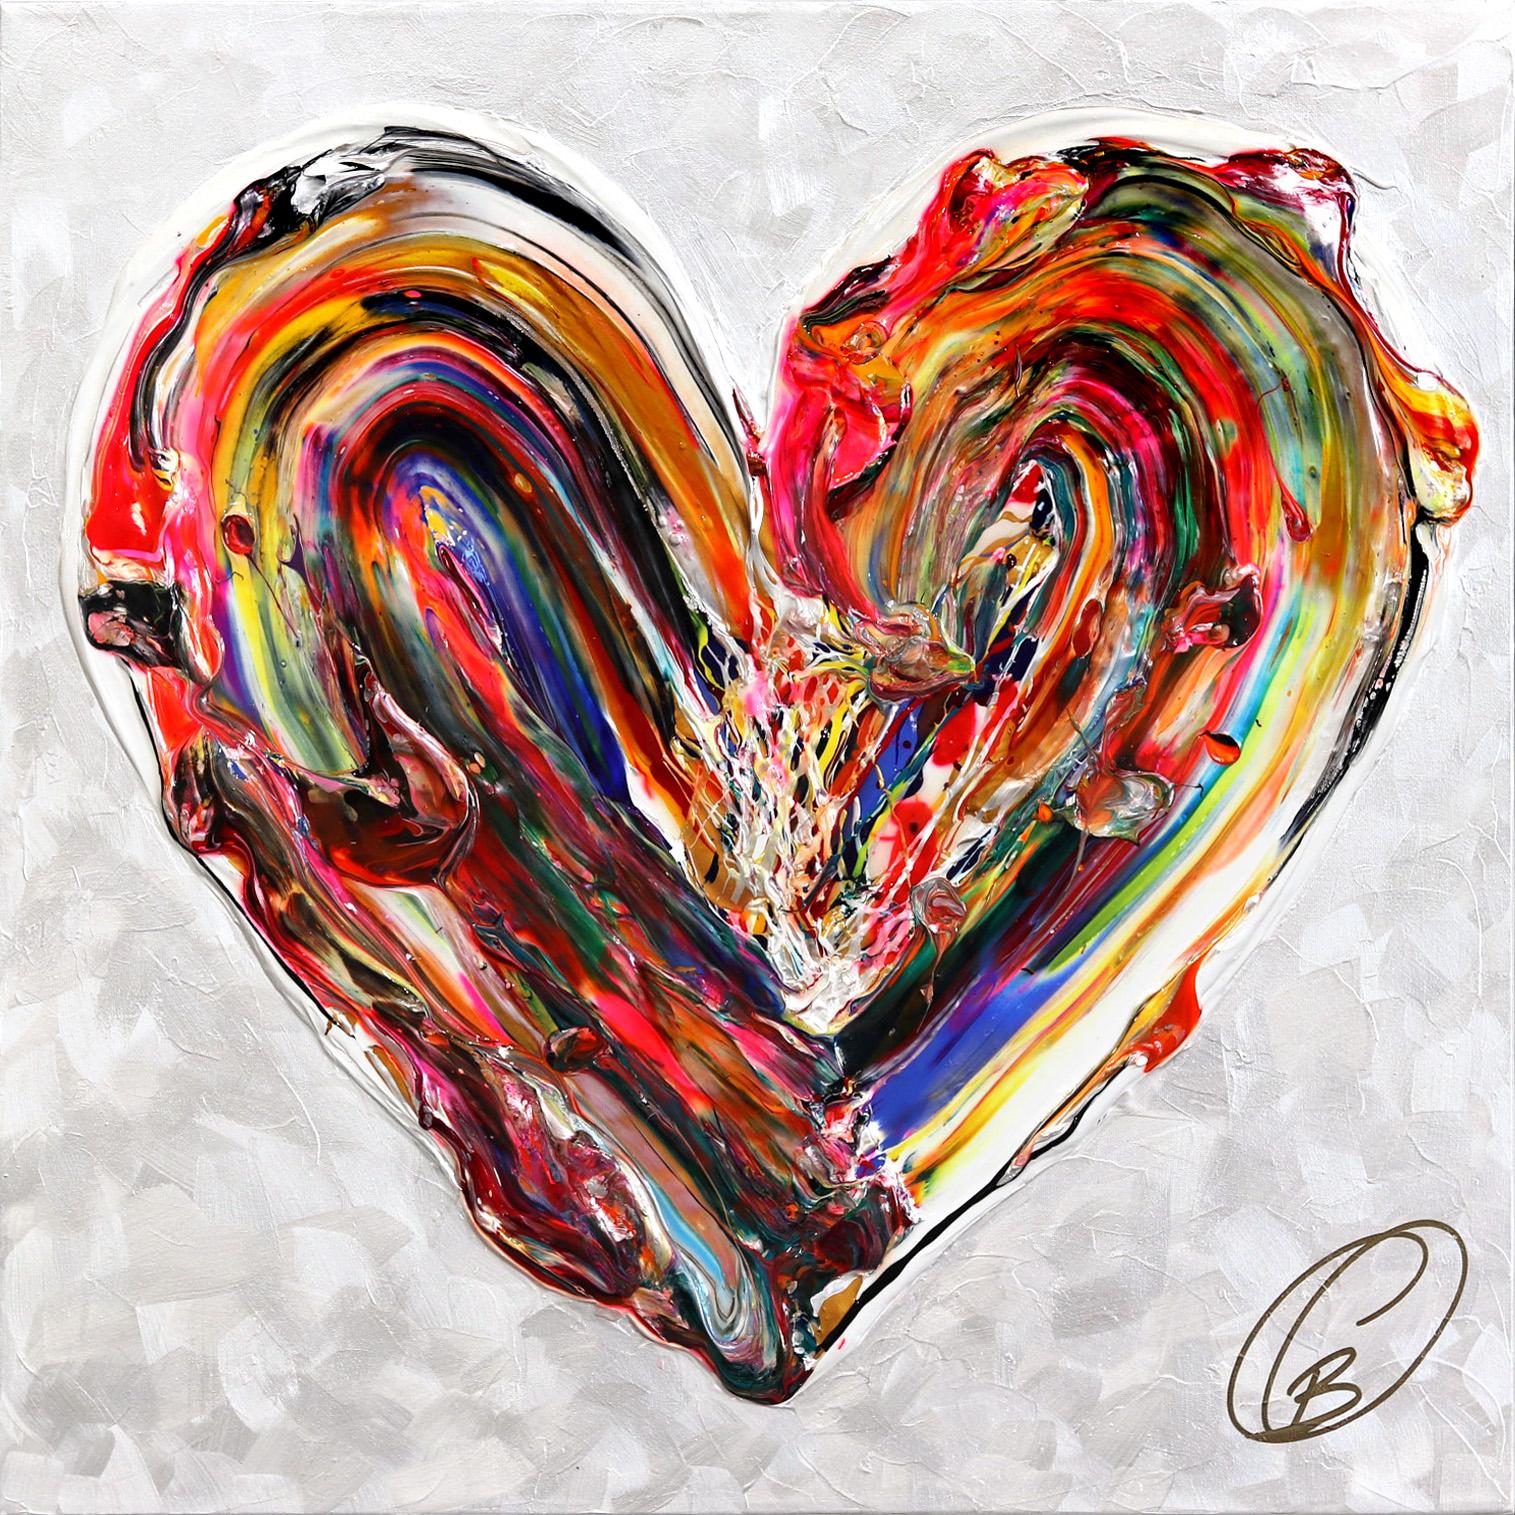 Cynthia Coulombe Bégin Figurative Painting - You Are The One That I've Been Waiting For - Colorful Thick Paint Heart Artwork